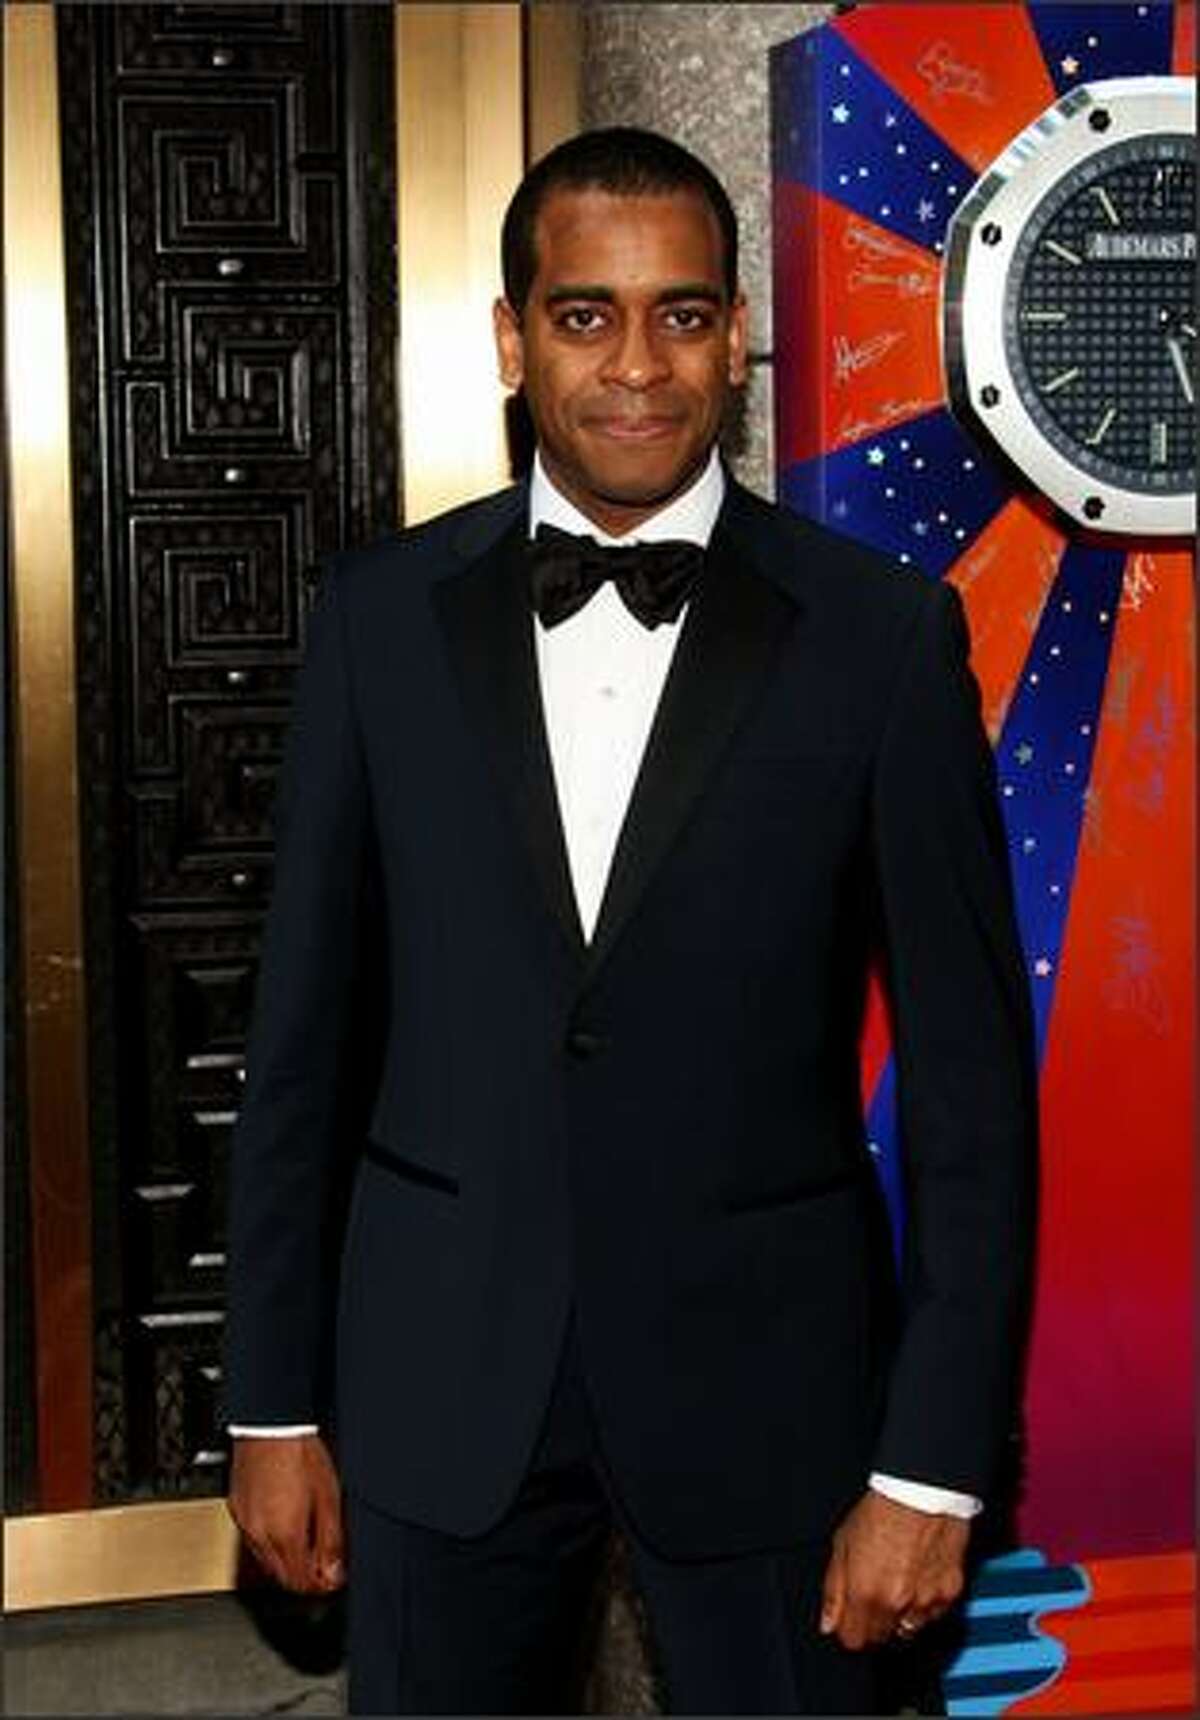 Actor Daniel Baker attends the 63rd Annual Tony Awards at Radio City Music Hall on Sunday in New York City.